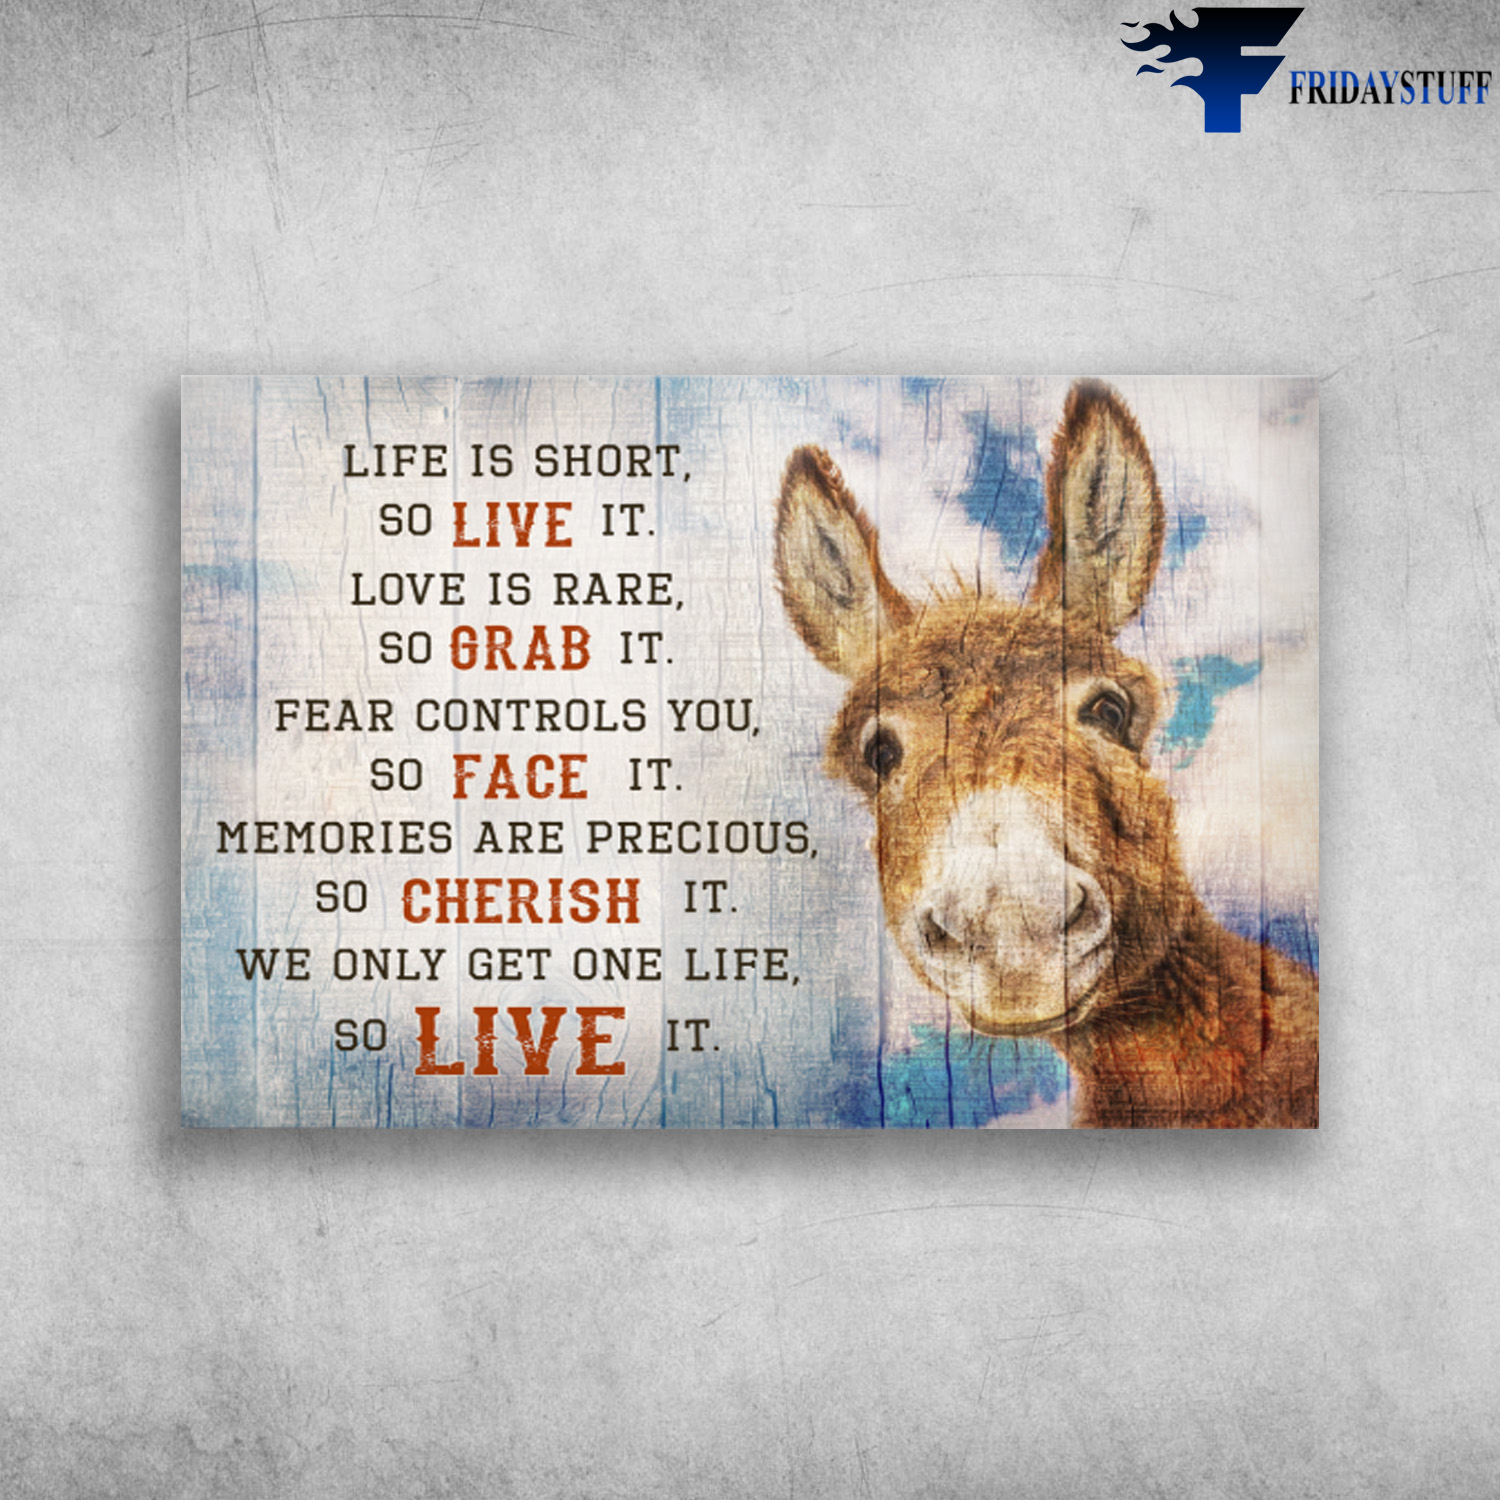 The Baby Donkey - Life Is Short, So Live It, Love Is Race, So Grab It, Fear Controls You, So Face It, Memories Are Precious, So Cherish it, We Only Get One Life, So Live It